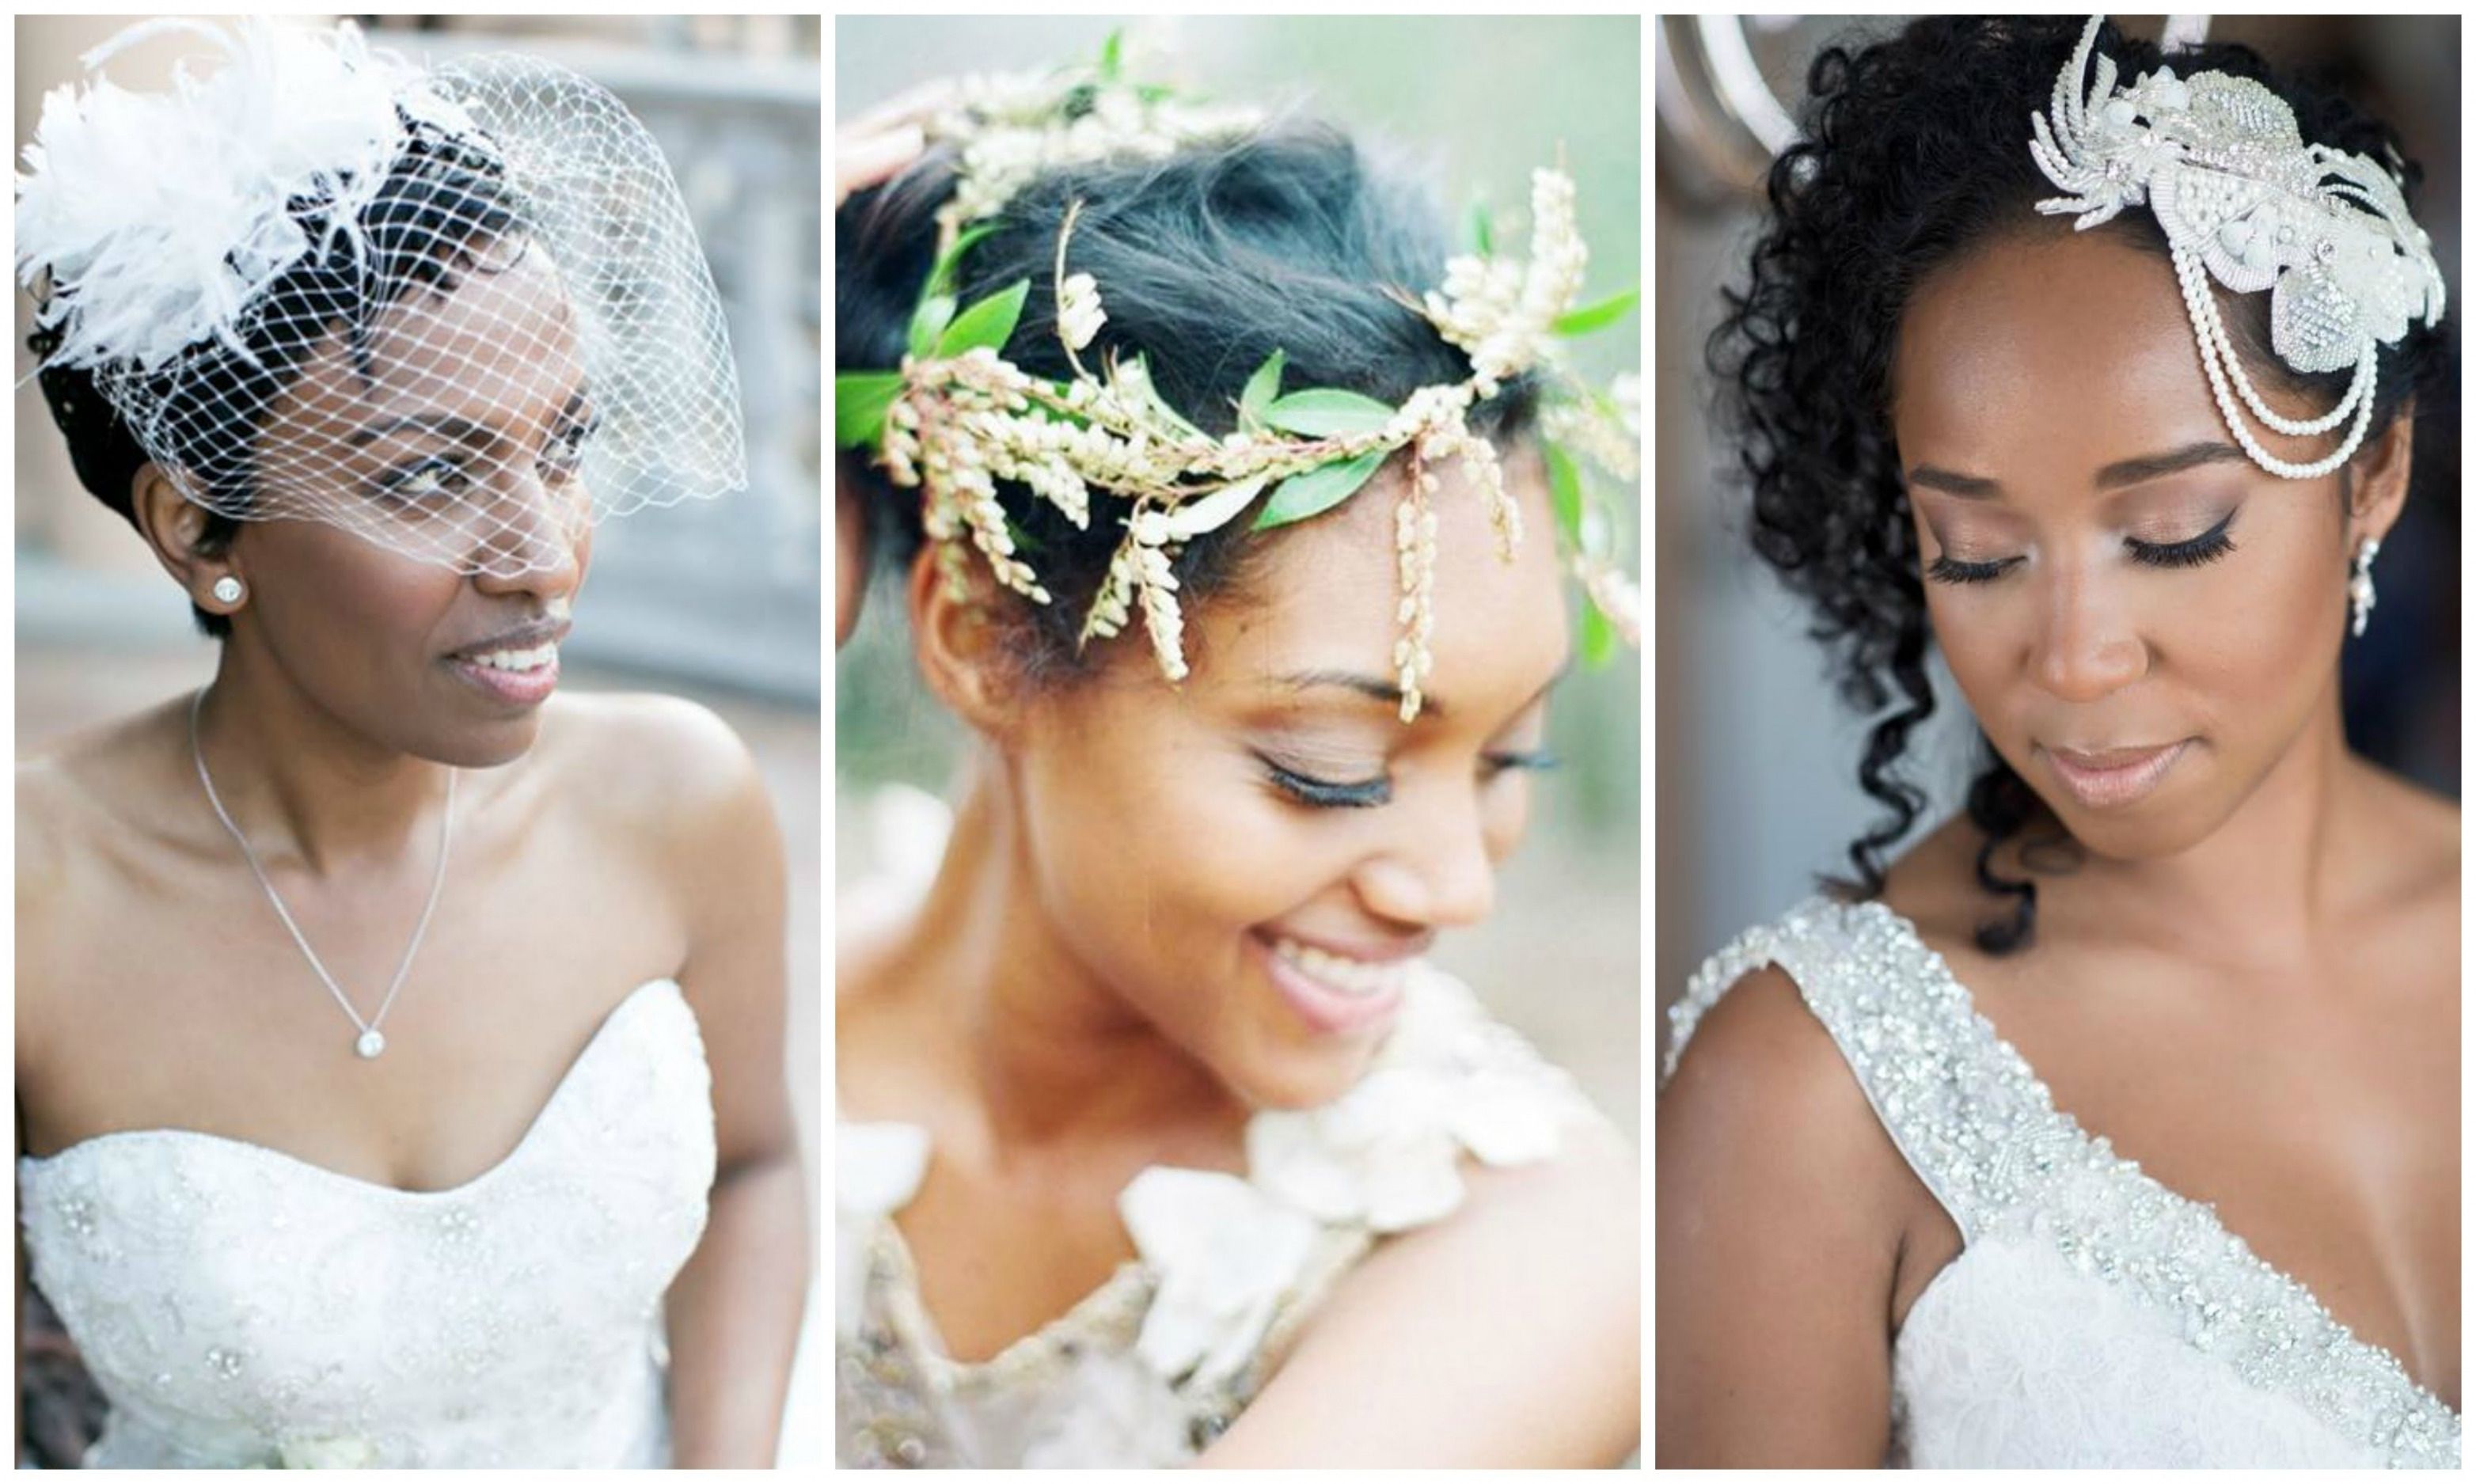 Wedding Hairstyles For African American Bridesmaids With Short Hair Pertaining To Recent Short Wedding Hairstyles For Black Bridesmaids (View 10 of 15)